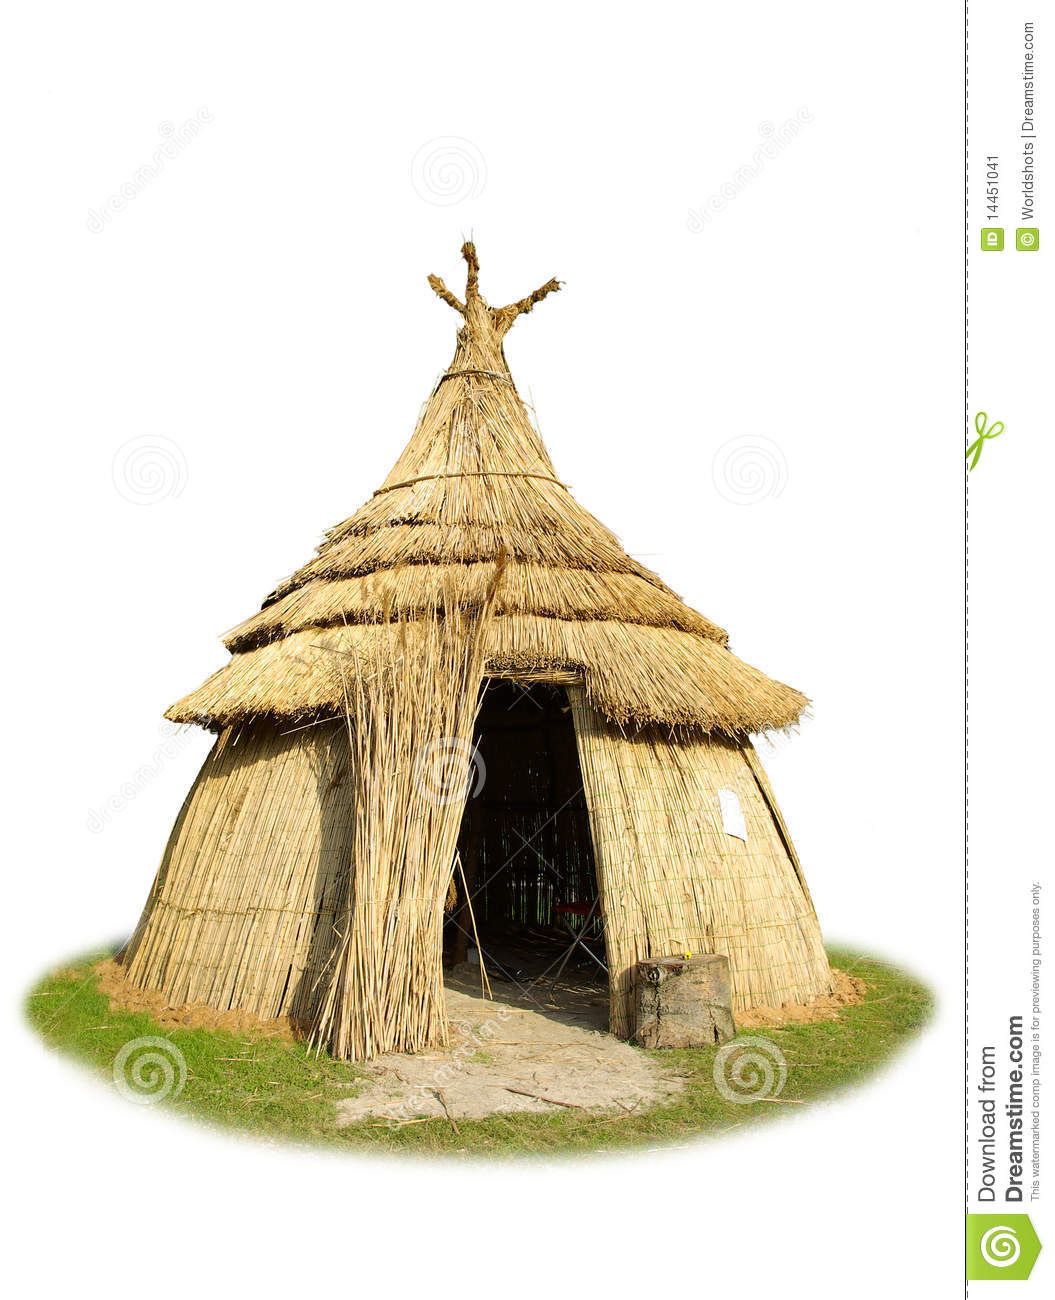     Background Isolated Picture Of African Thatched Hut Made Of Straw